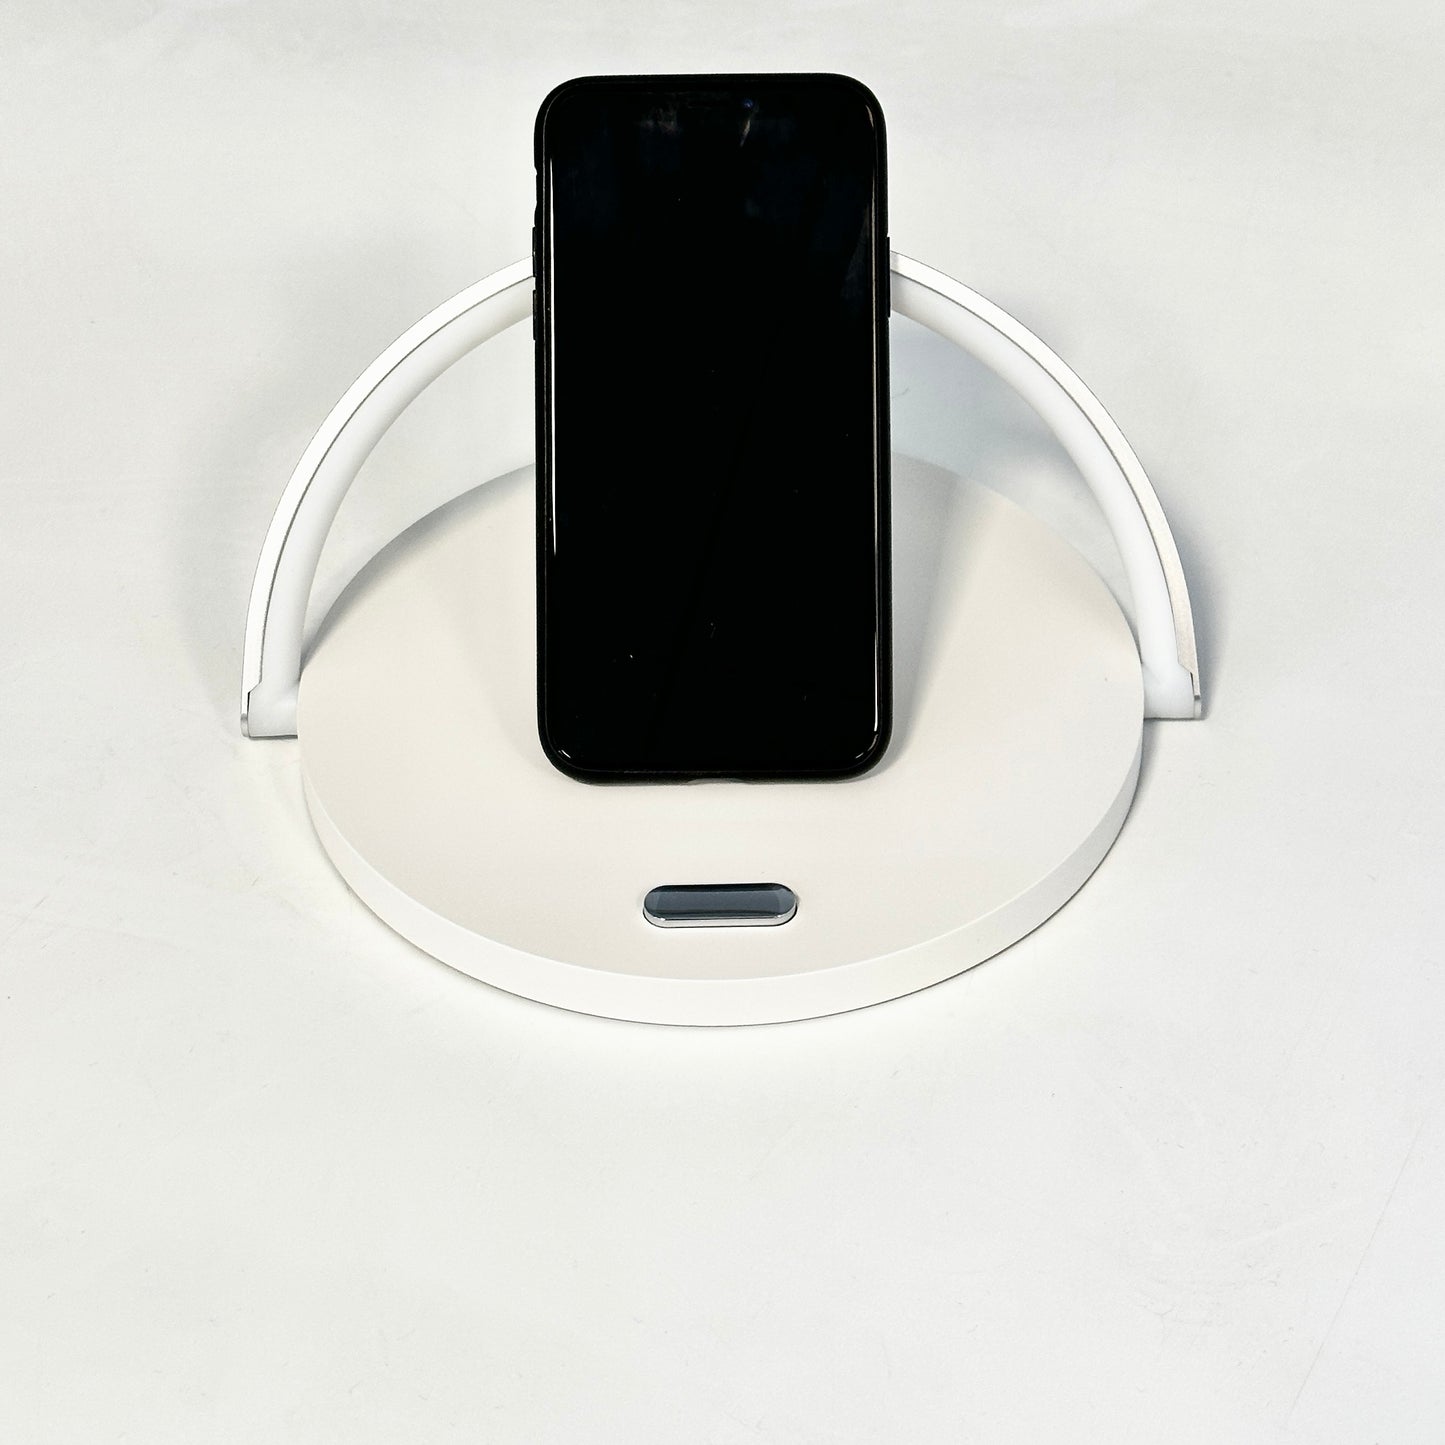 LED Arch Desk Lamp with Wireless Charger